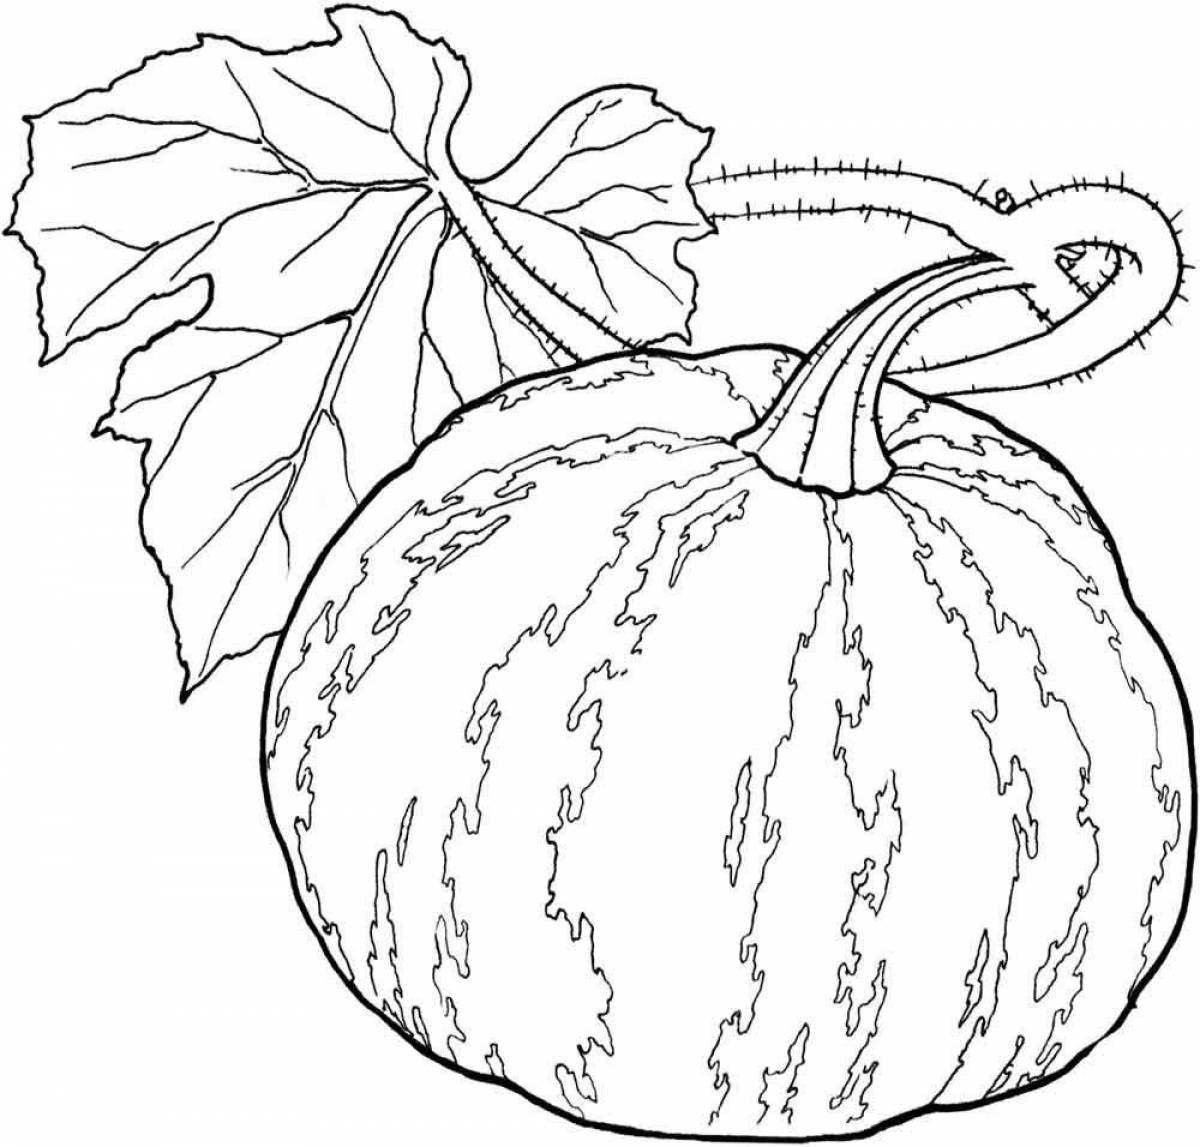 Attentive coloring of fruits and vegetables